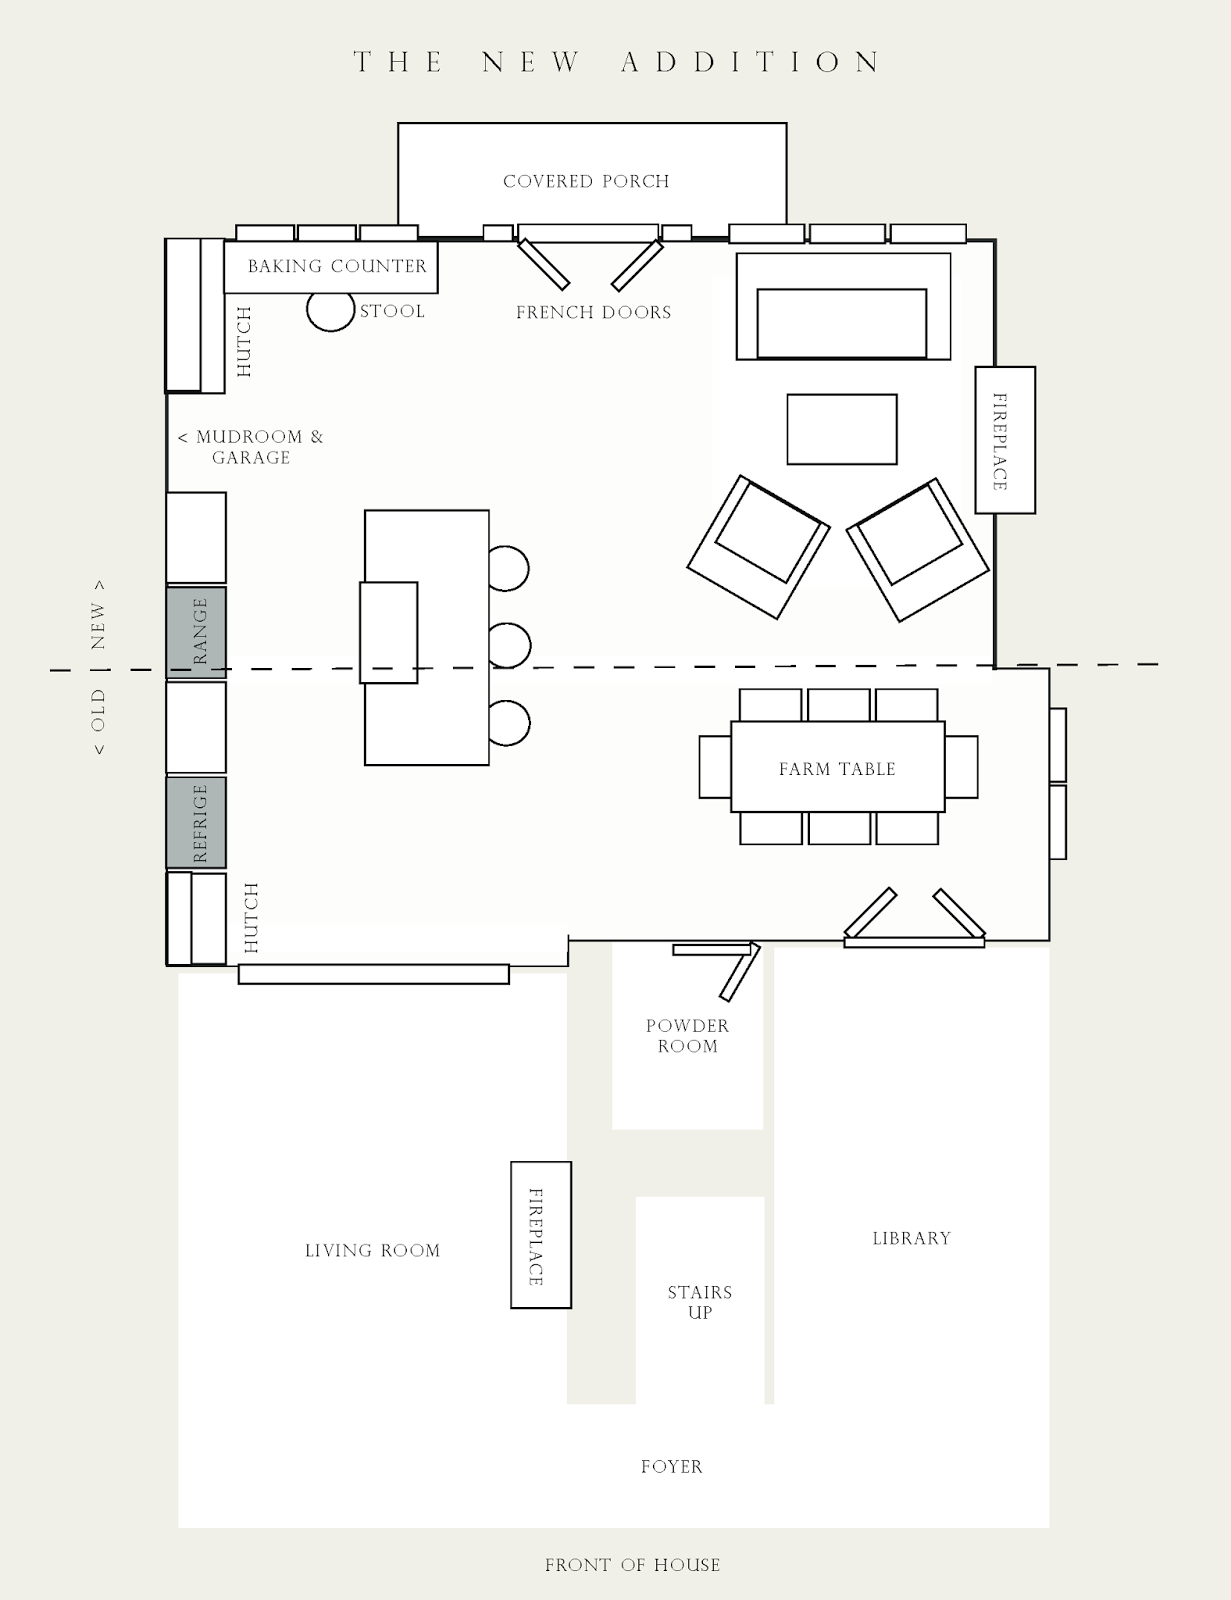 Our New Addition Kitchen Plans  Need your help 